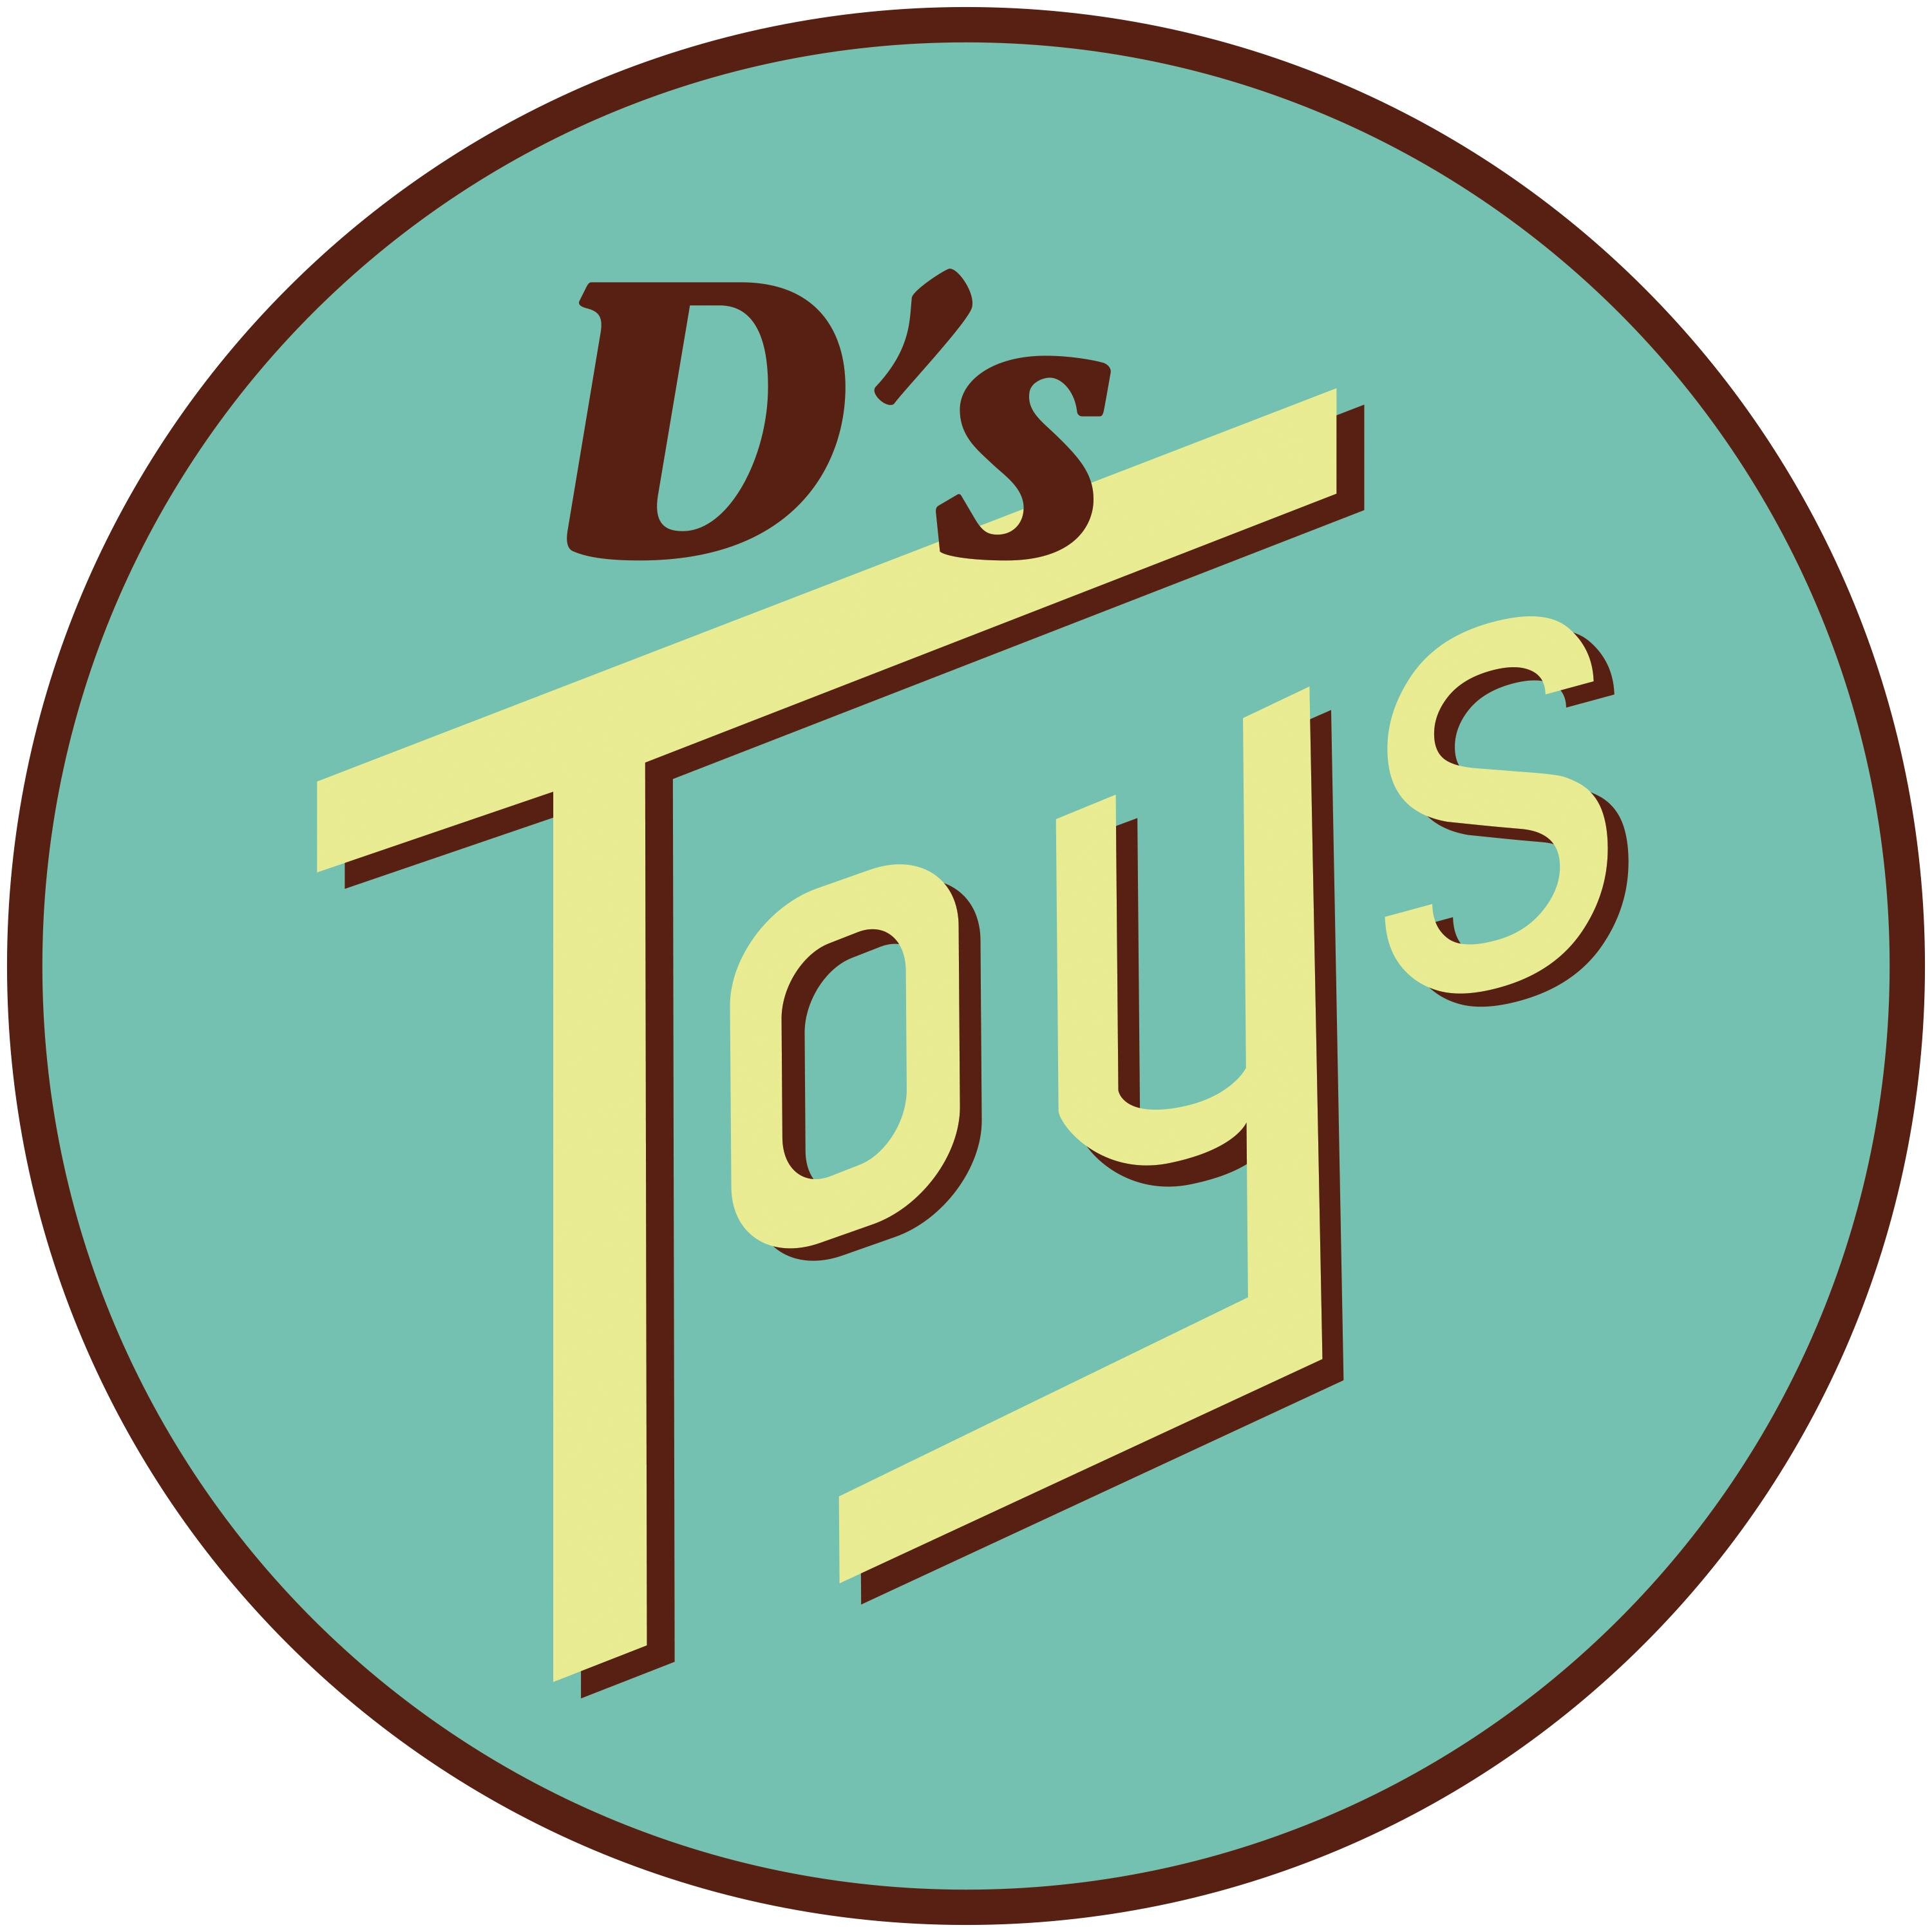 Specializes in vintage toys and collectibles. Lines: Transformers Star Wars M.A.S.K. and Associated: news blogs movies and other information.